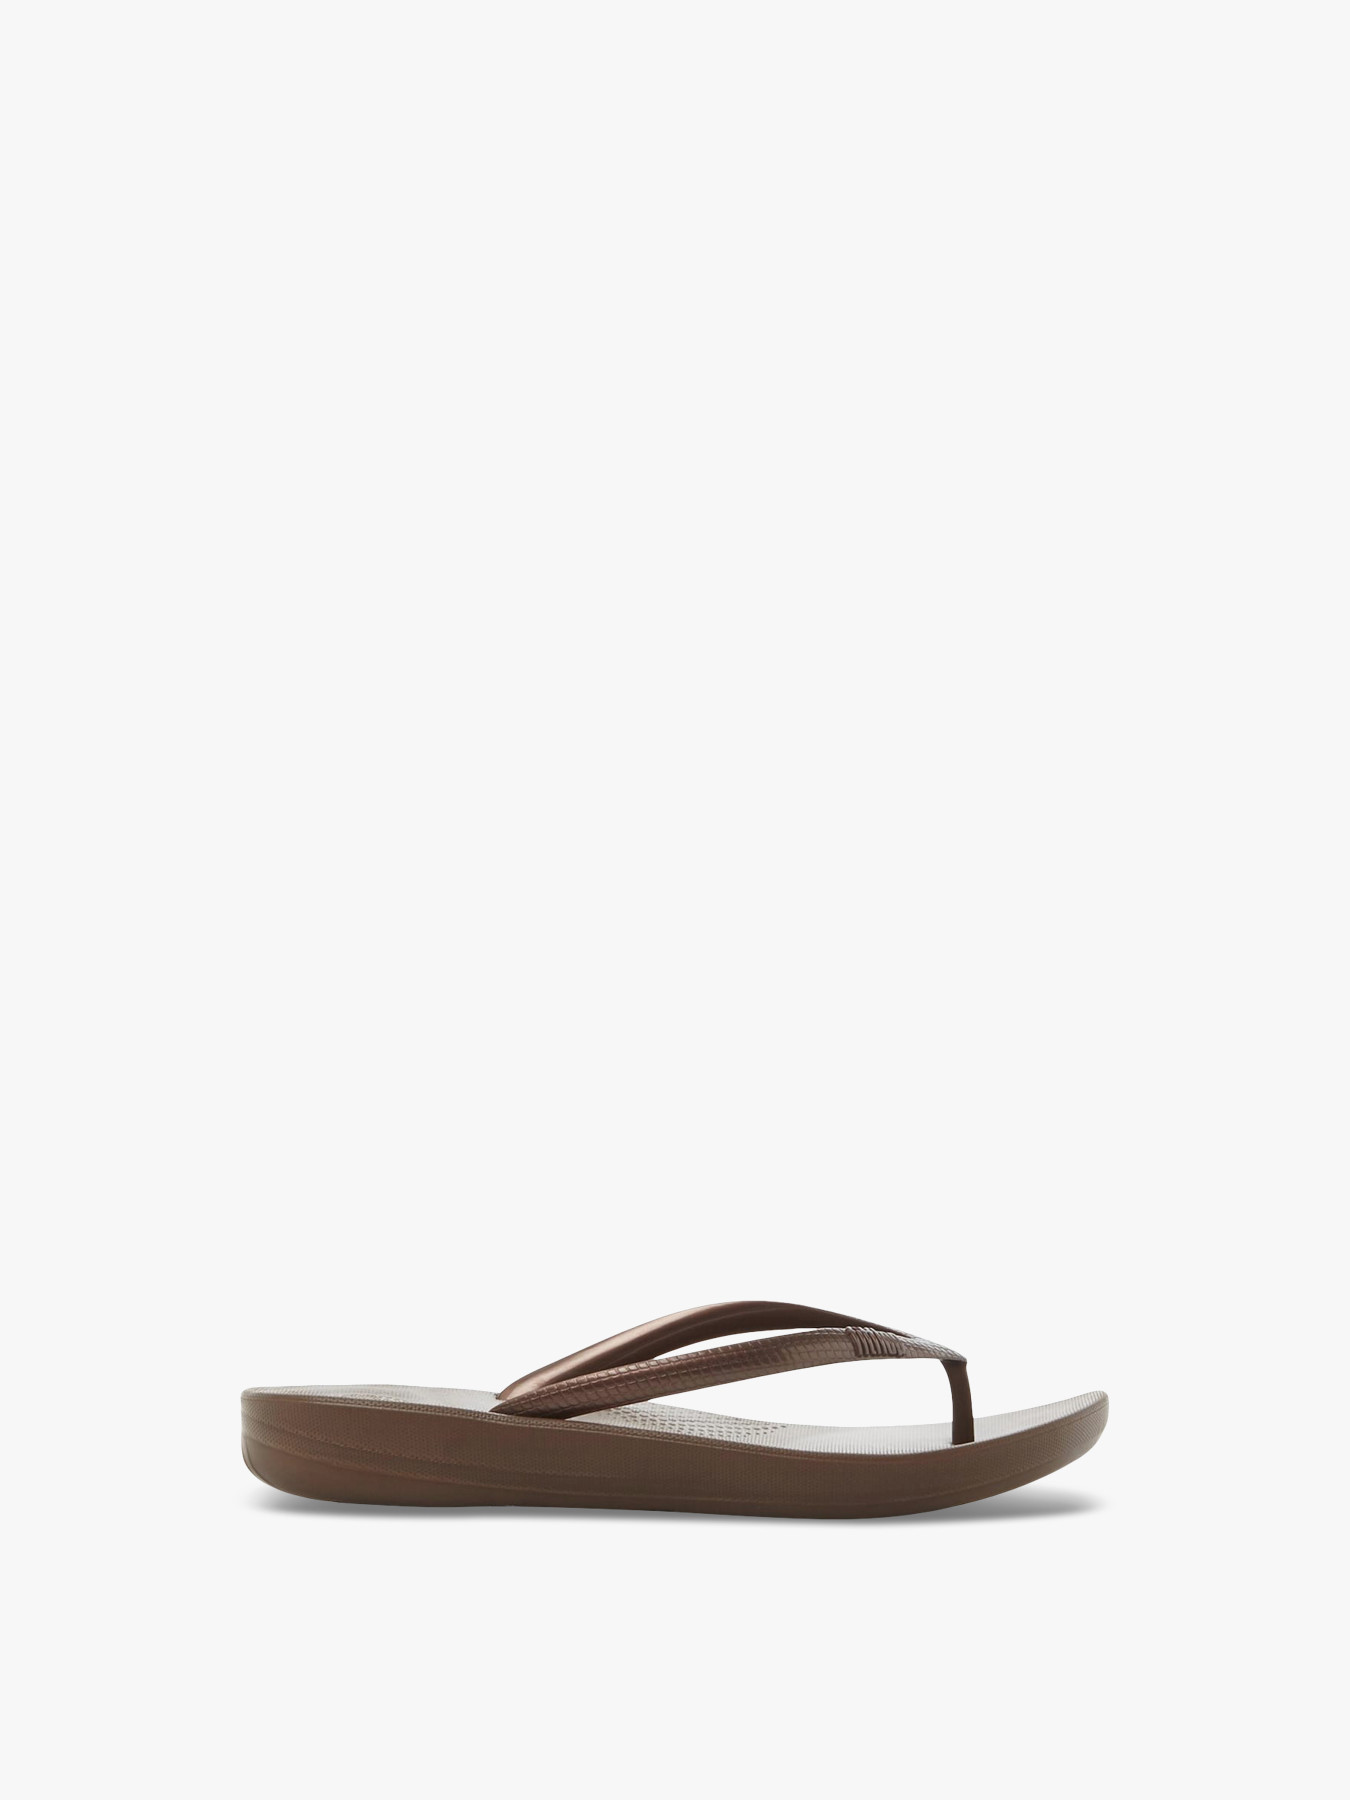 FITFLOP WOMEN'S IQUSHION